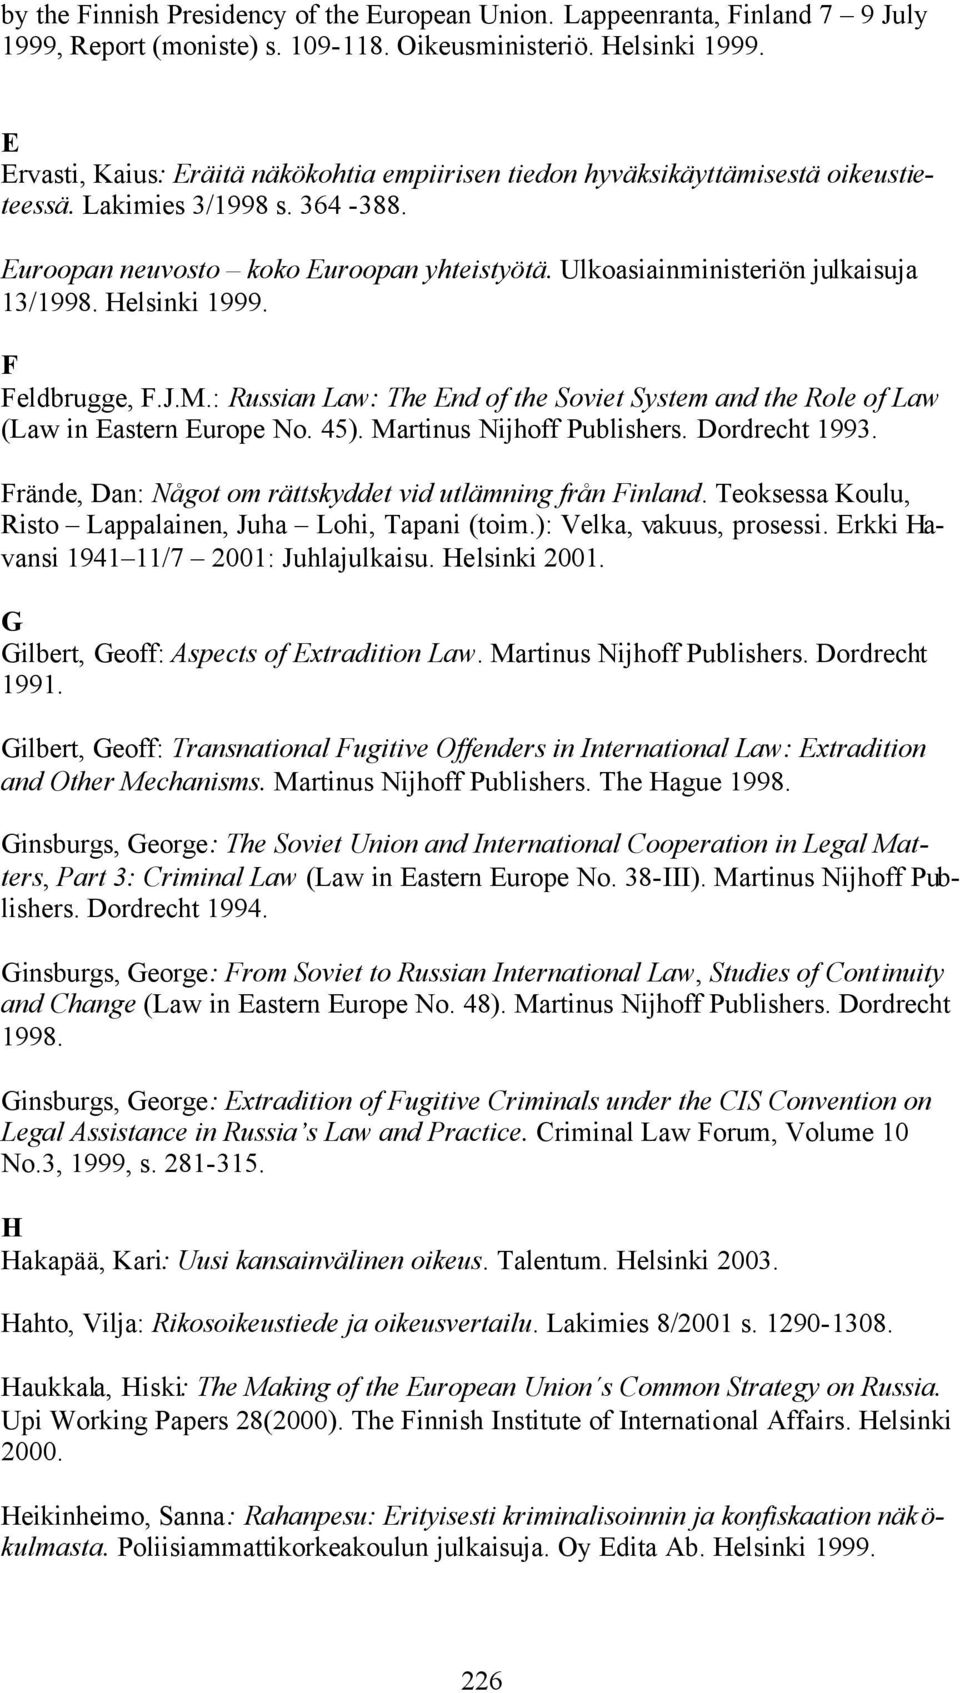 Ulkoasiainministeriön julkaisuja 13/1998. Helsinki 1999. F Feldbrugge, F.J.M.: Russian Law: The End of the Soviet System and the Role of Law (Law in Eastern Europe No. 45).